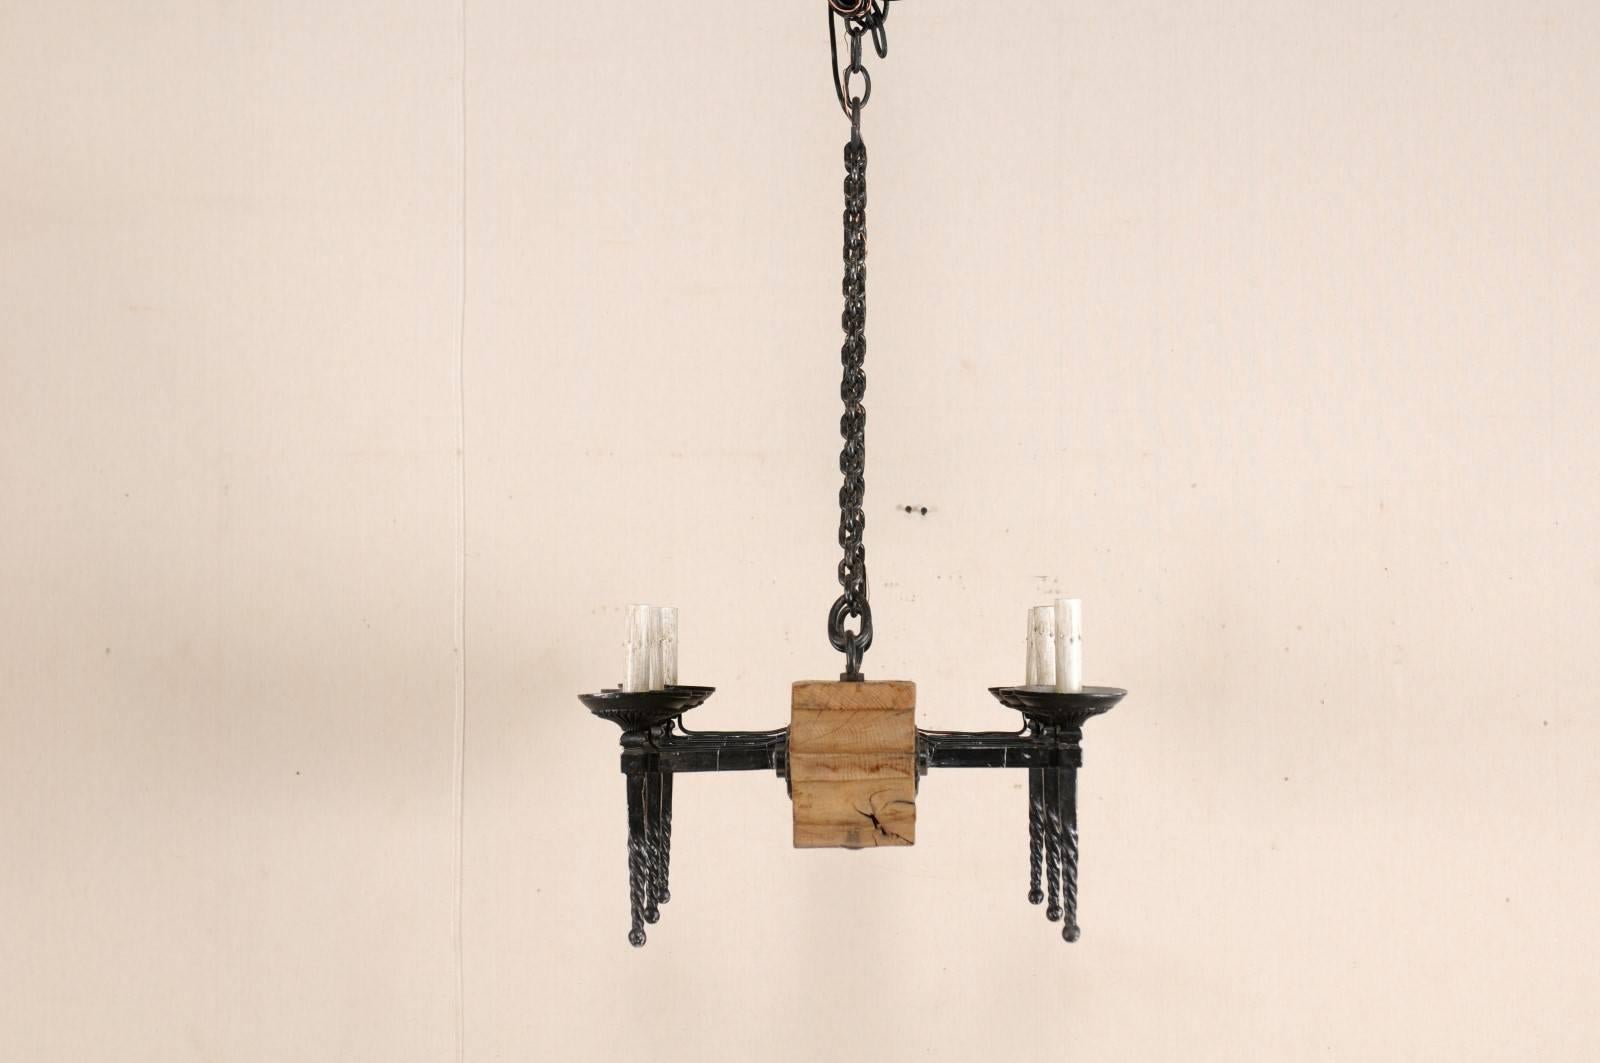 French Vintage Six-Light Wood and Ornate Iron Chandelier with Torch Style Arms For Sale 1